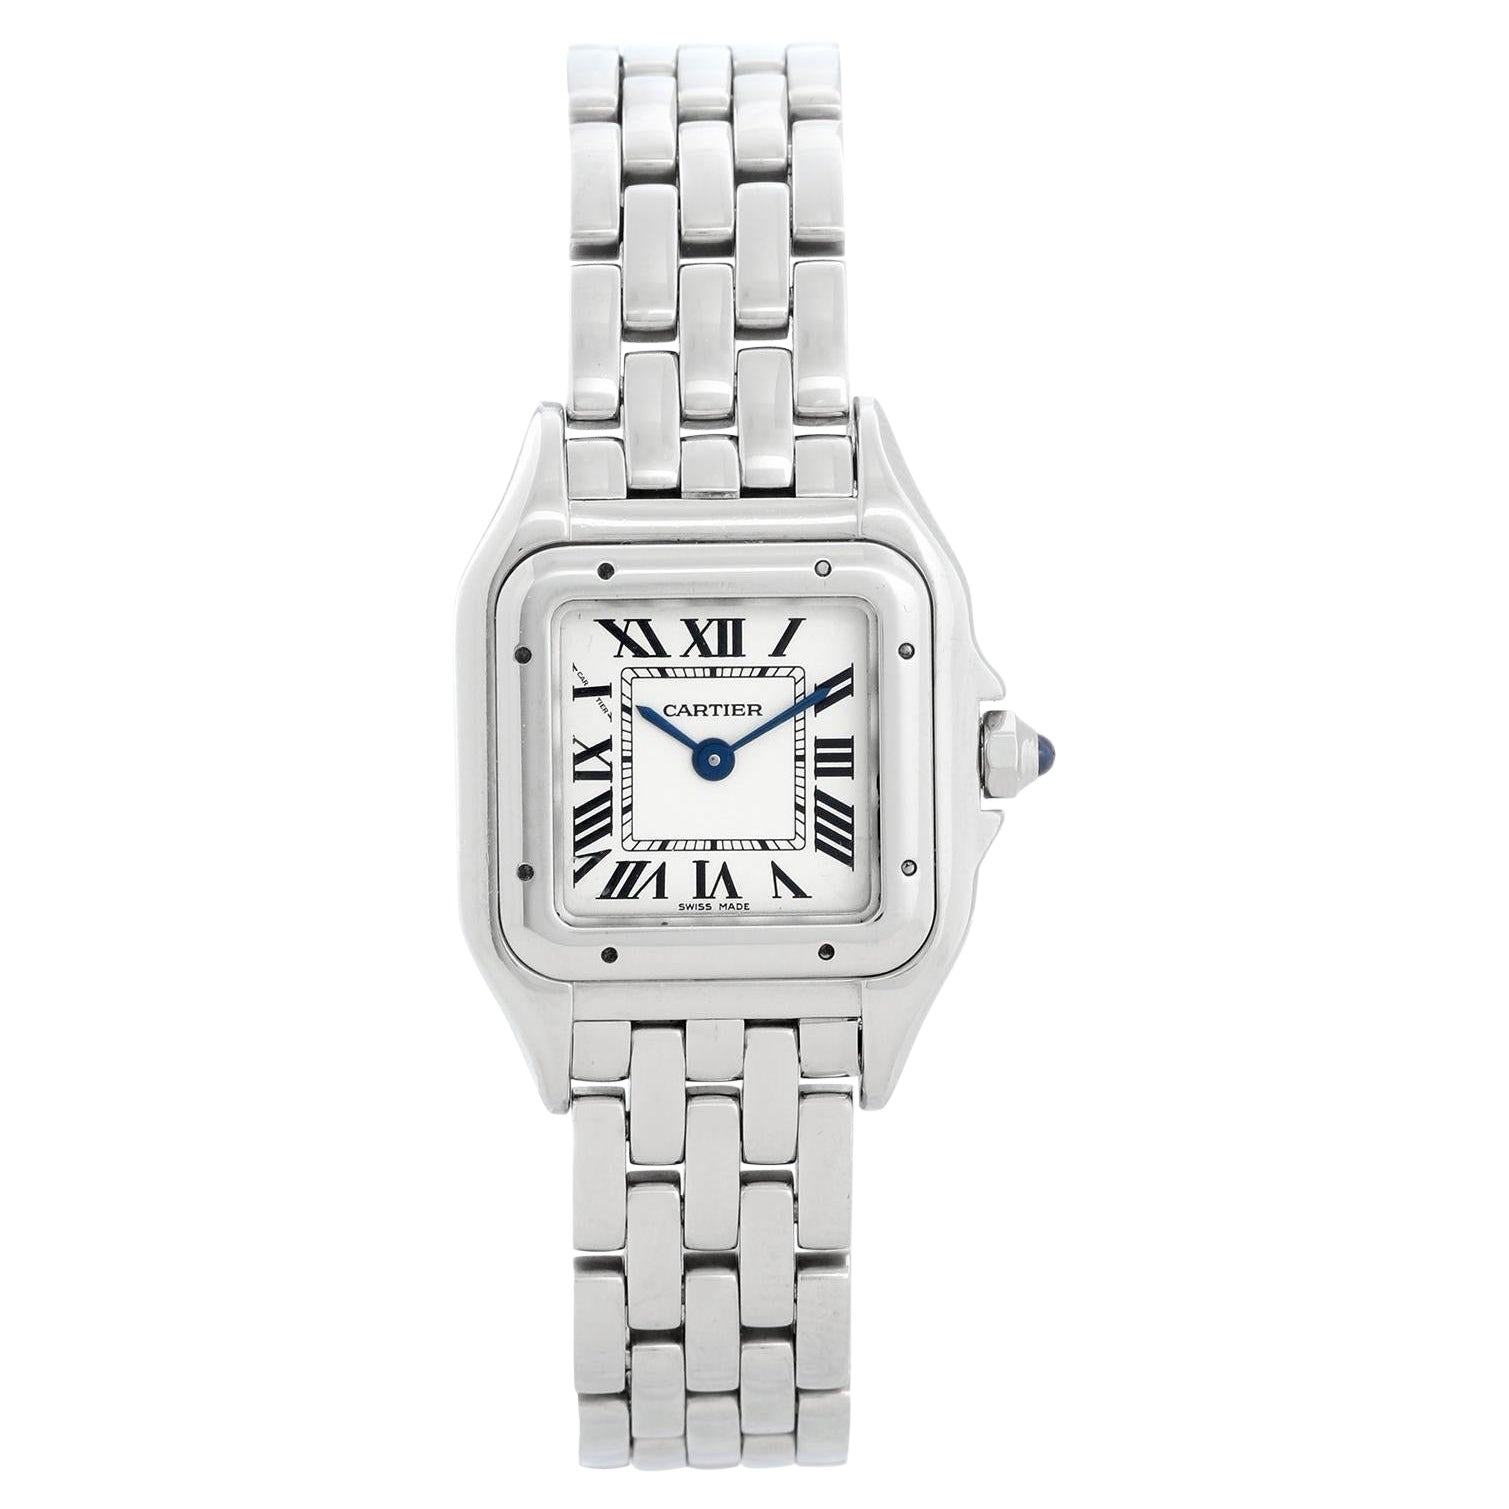 Cartier Ladies Stainless Steel Panthere Watch WSPN0006 4022